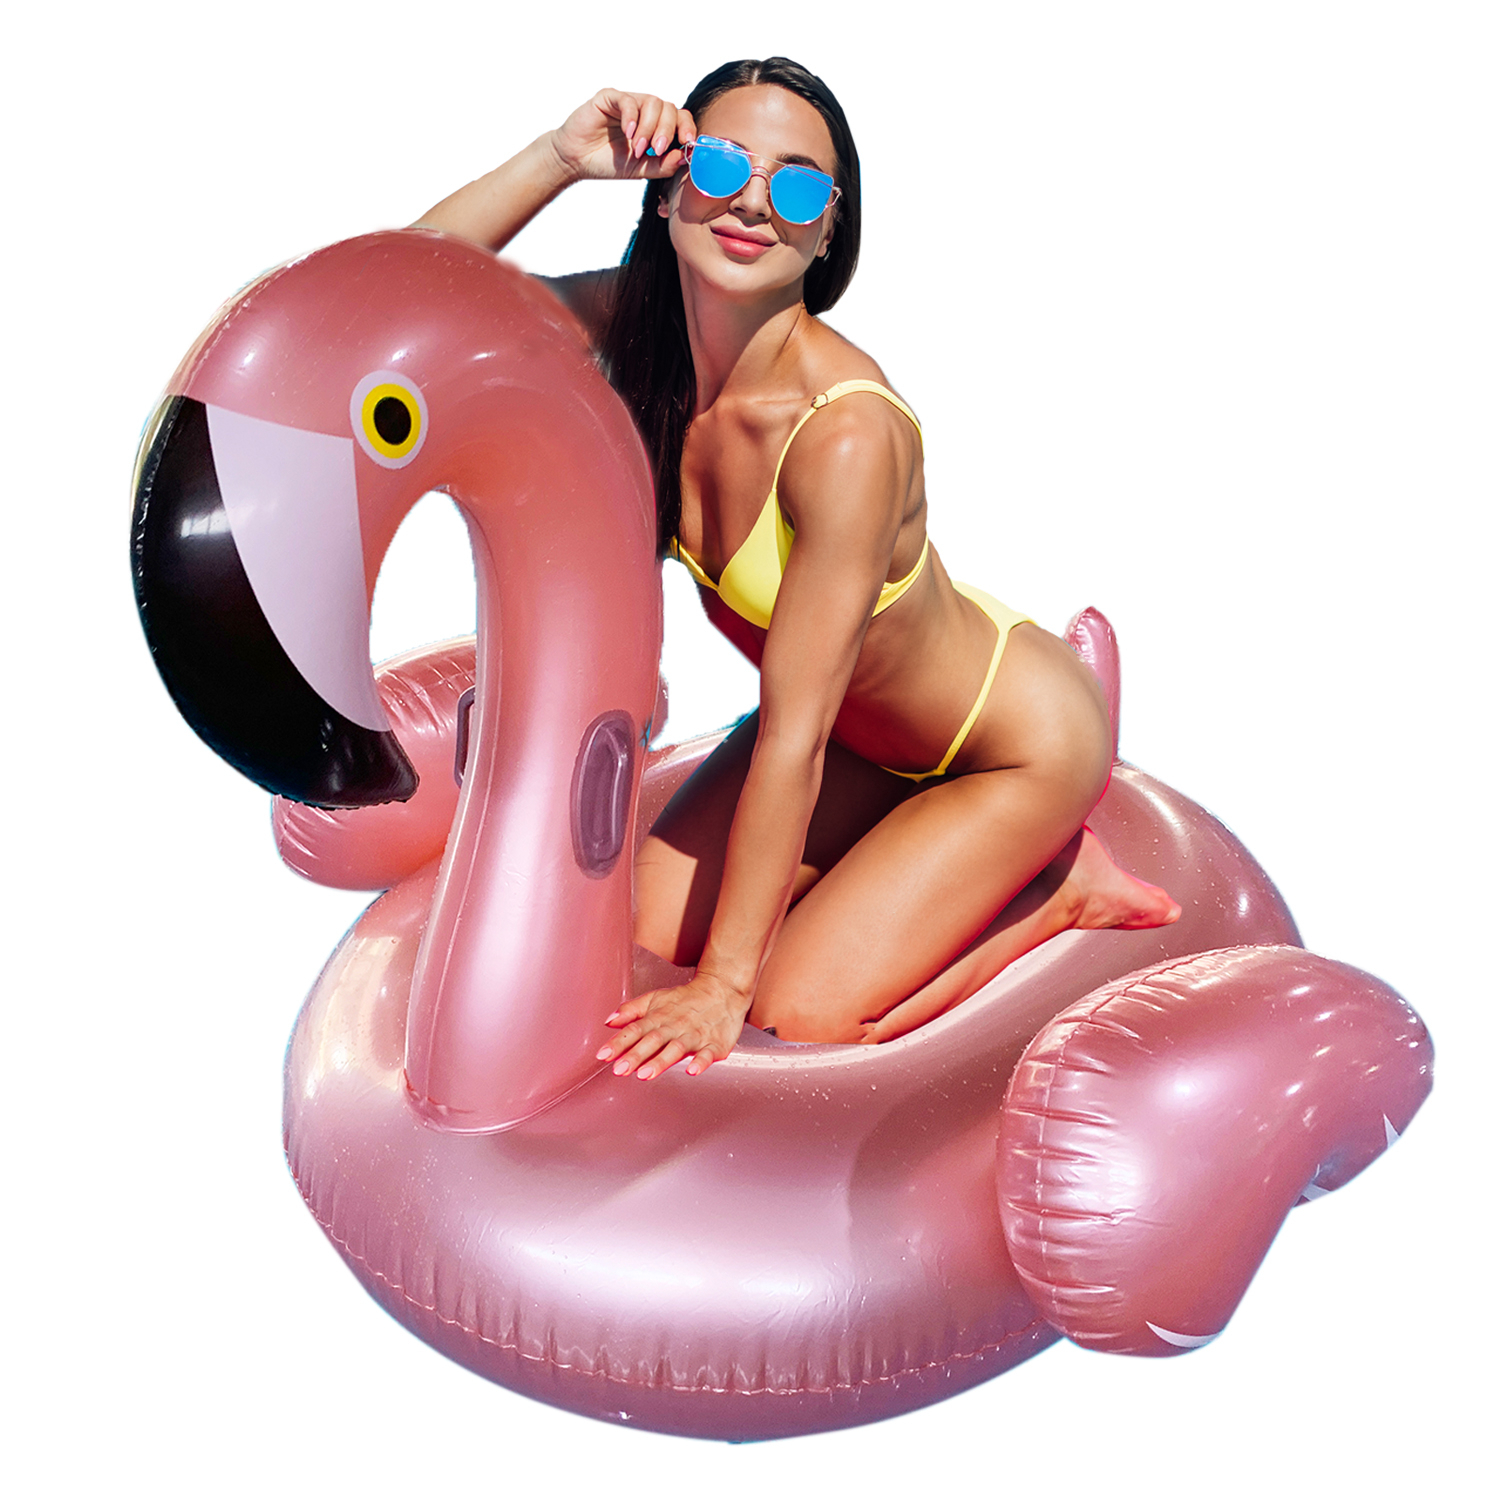 Dimple Giant Inflatable Luxurious Flamingo Pool Float Toy 60x60x34 Inches, Fun Beach Floaties, Swim Party Toys For Adults & Kids (Rose Gold)